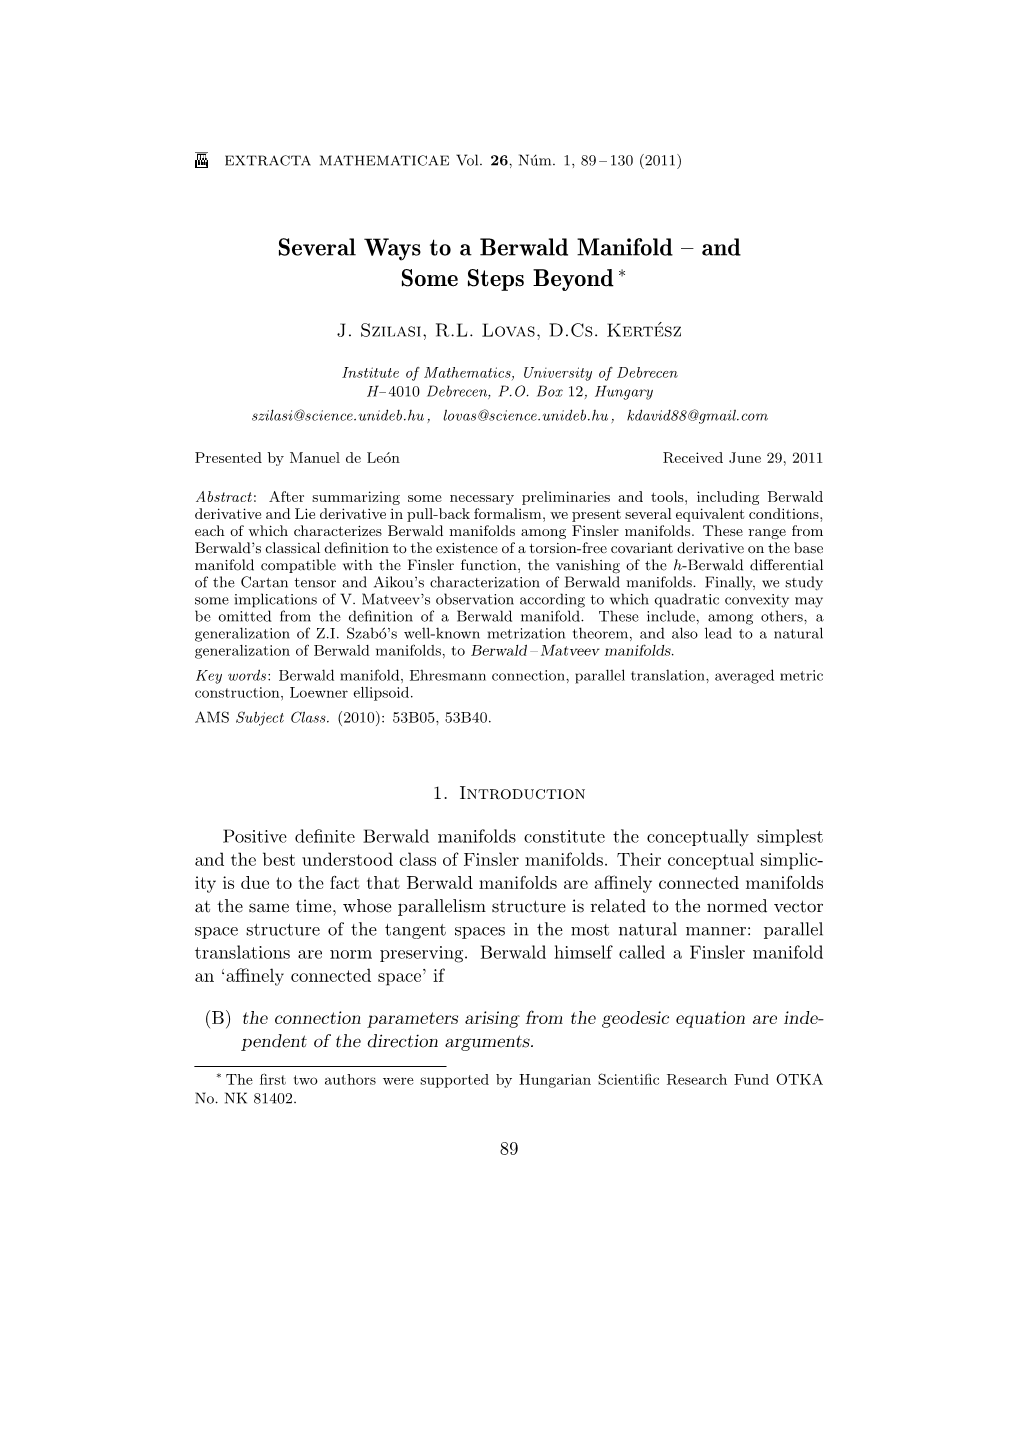 Several Ways to a Berwald Manifold – and Some Steps Beyond ∗